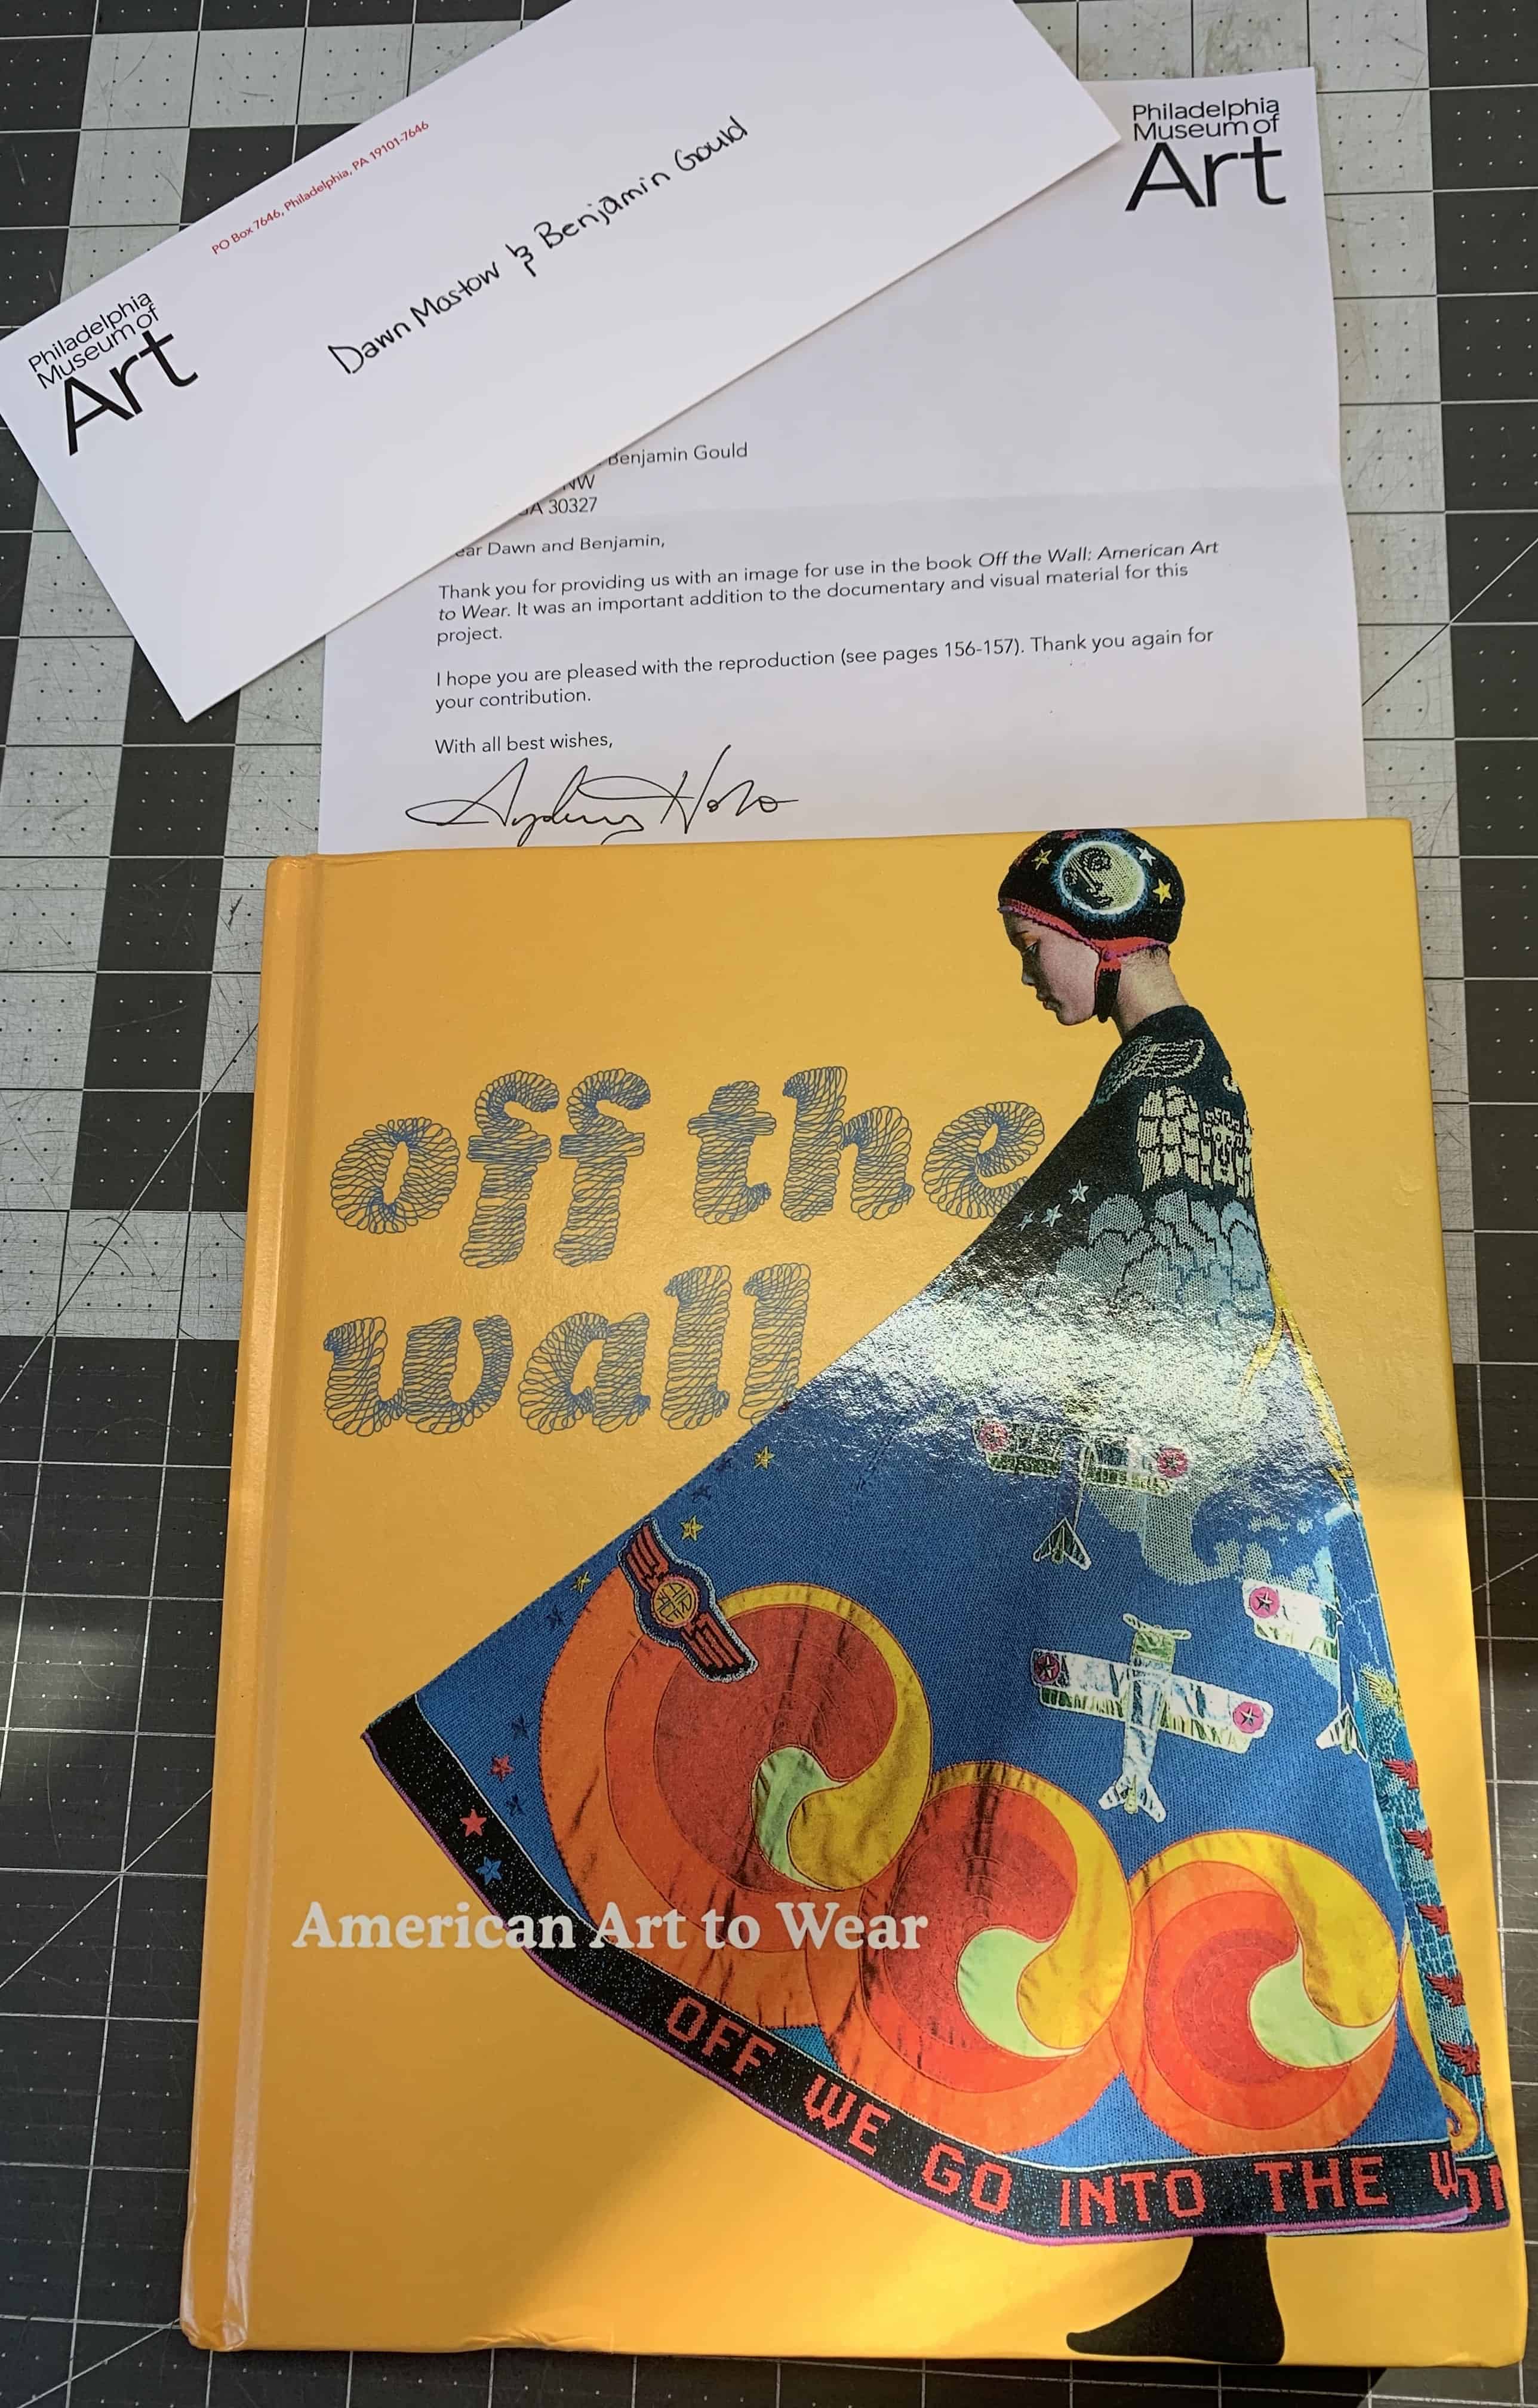 Off the Wall: American Art to Wear